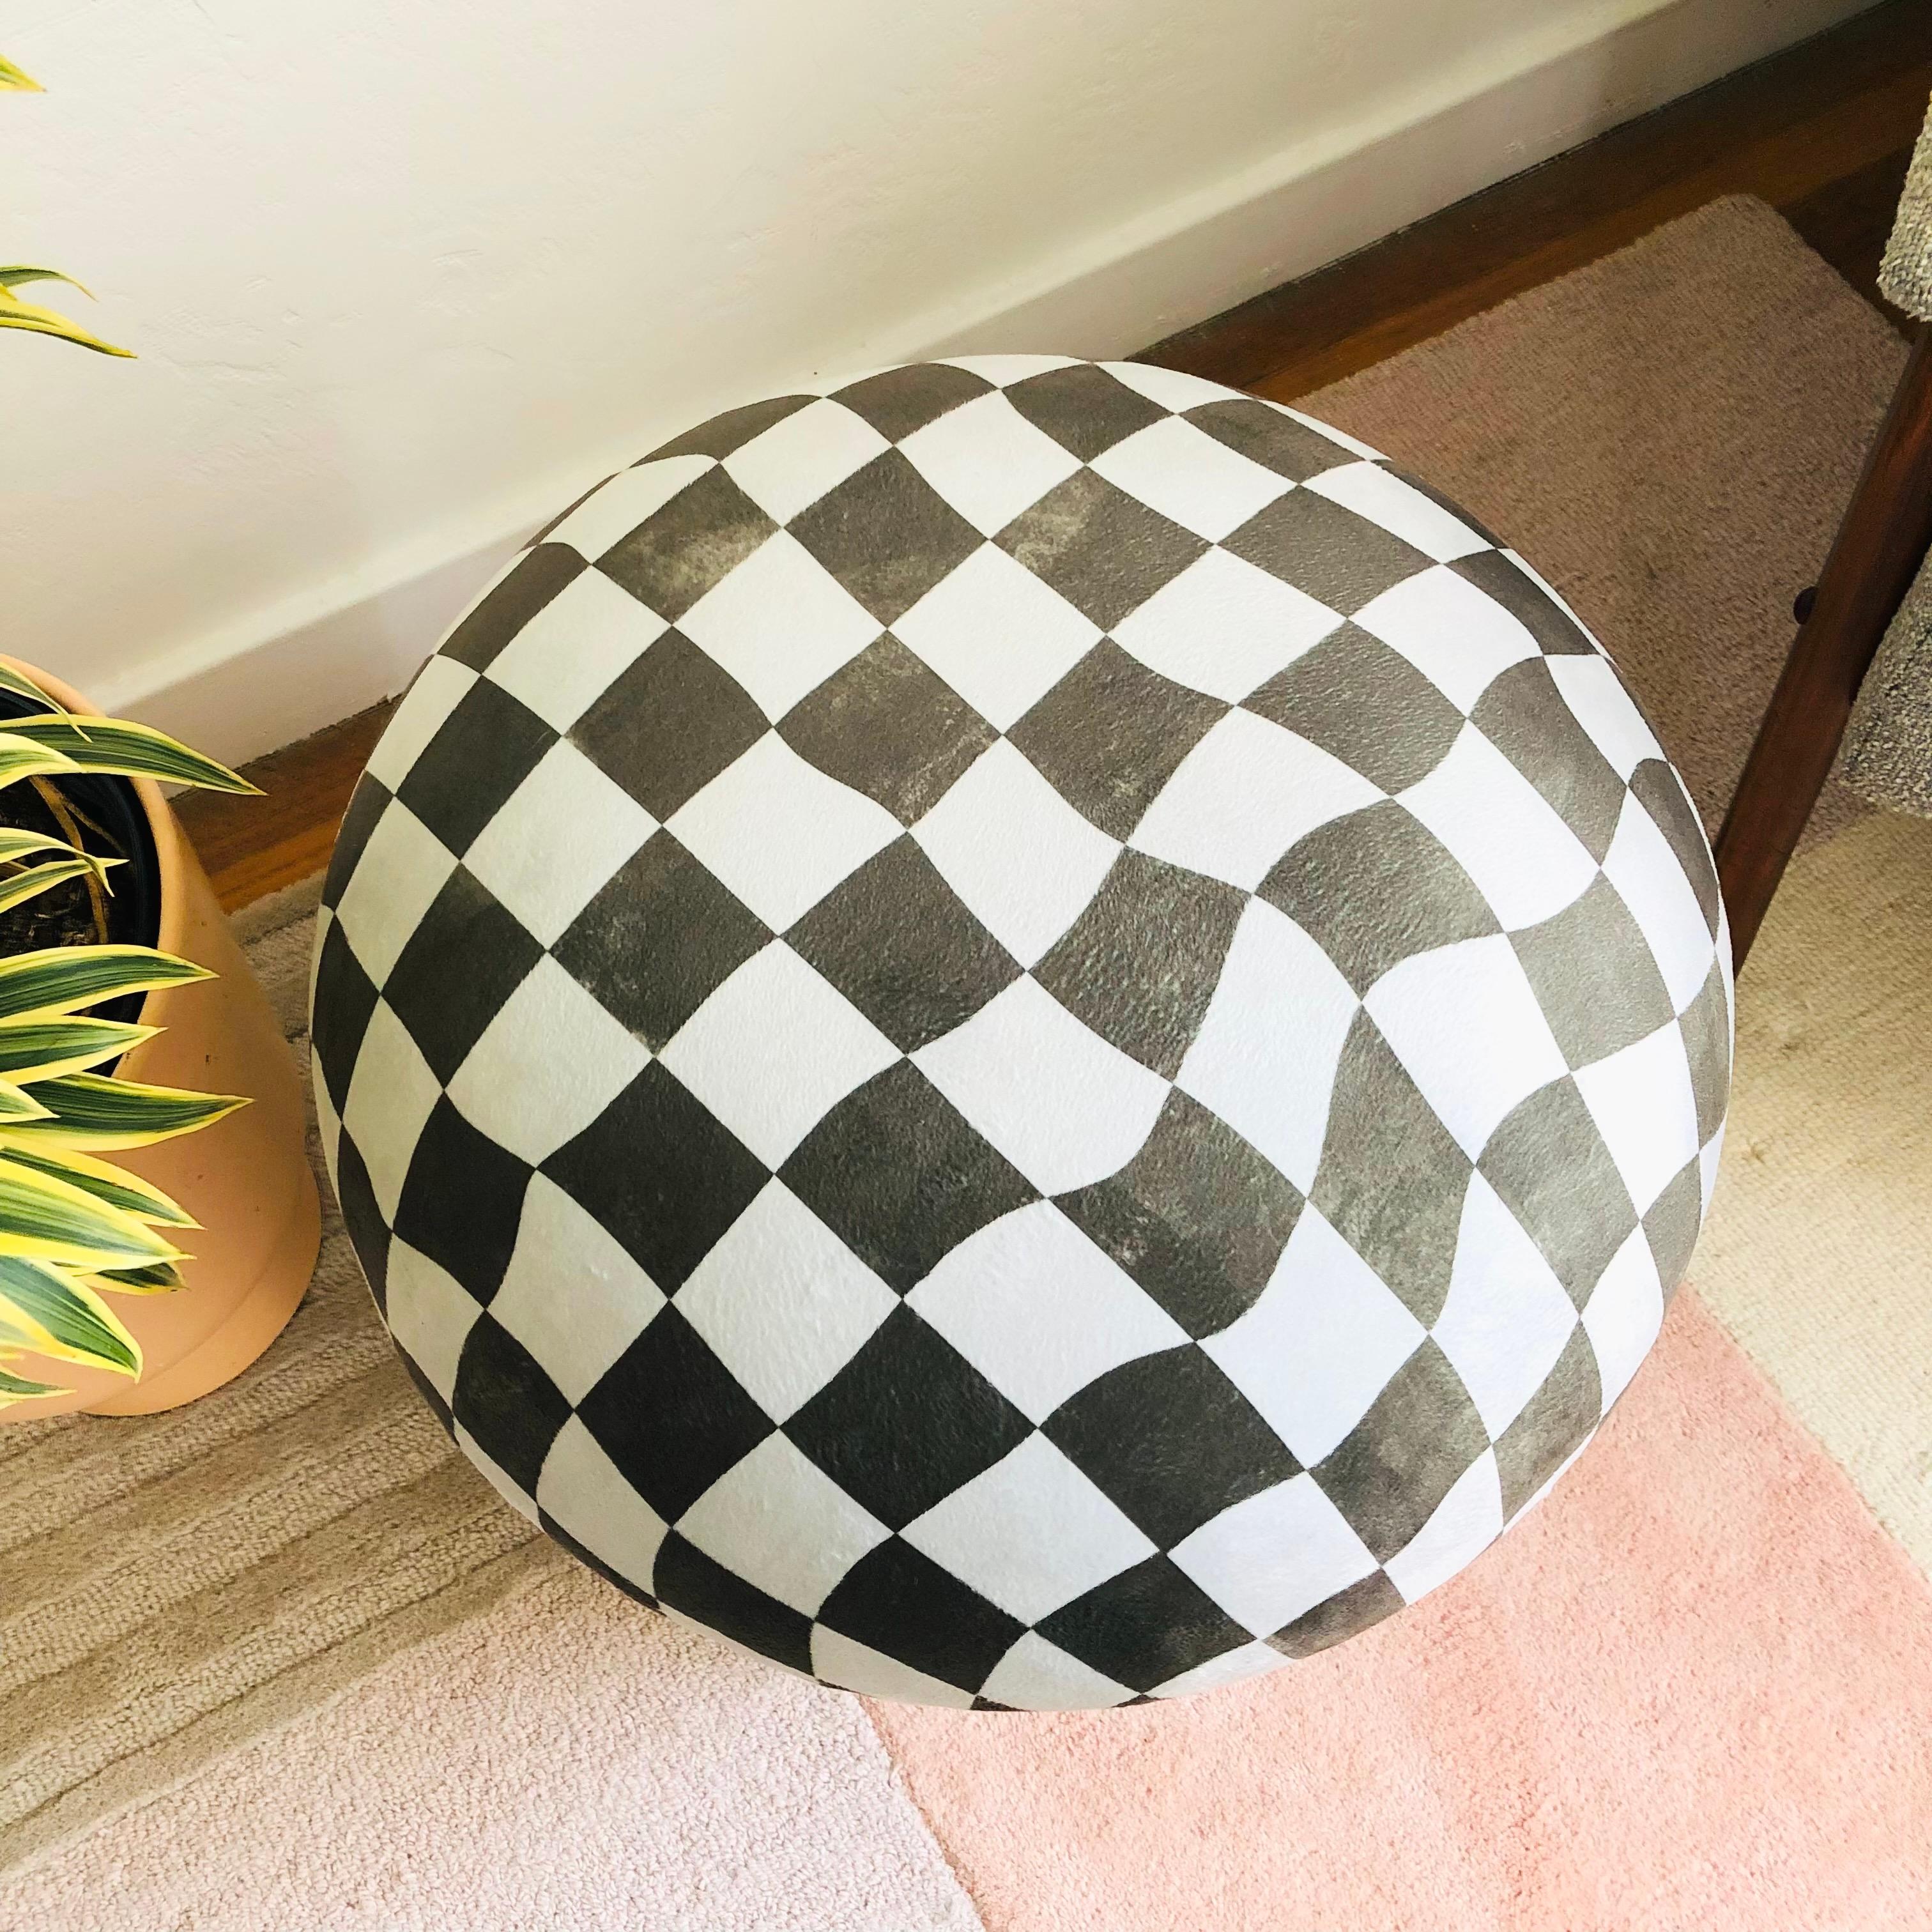 Mushroom Ottoman in Muted Olive Warped Checkered Velvet In New Condition For Sale In Vallejo, CA